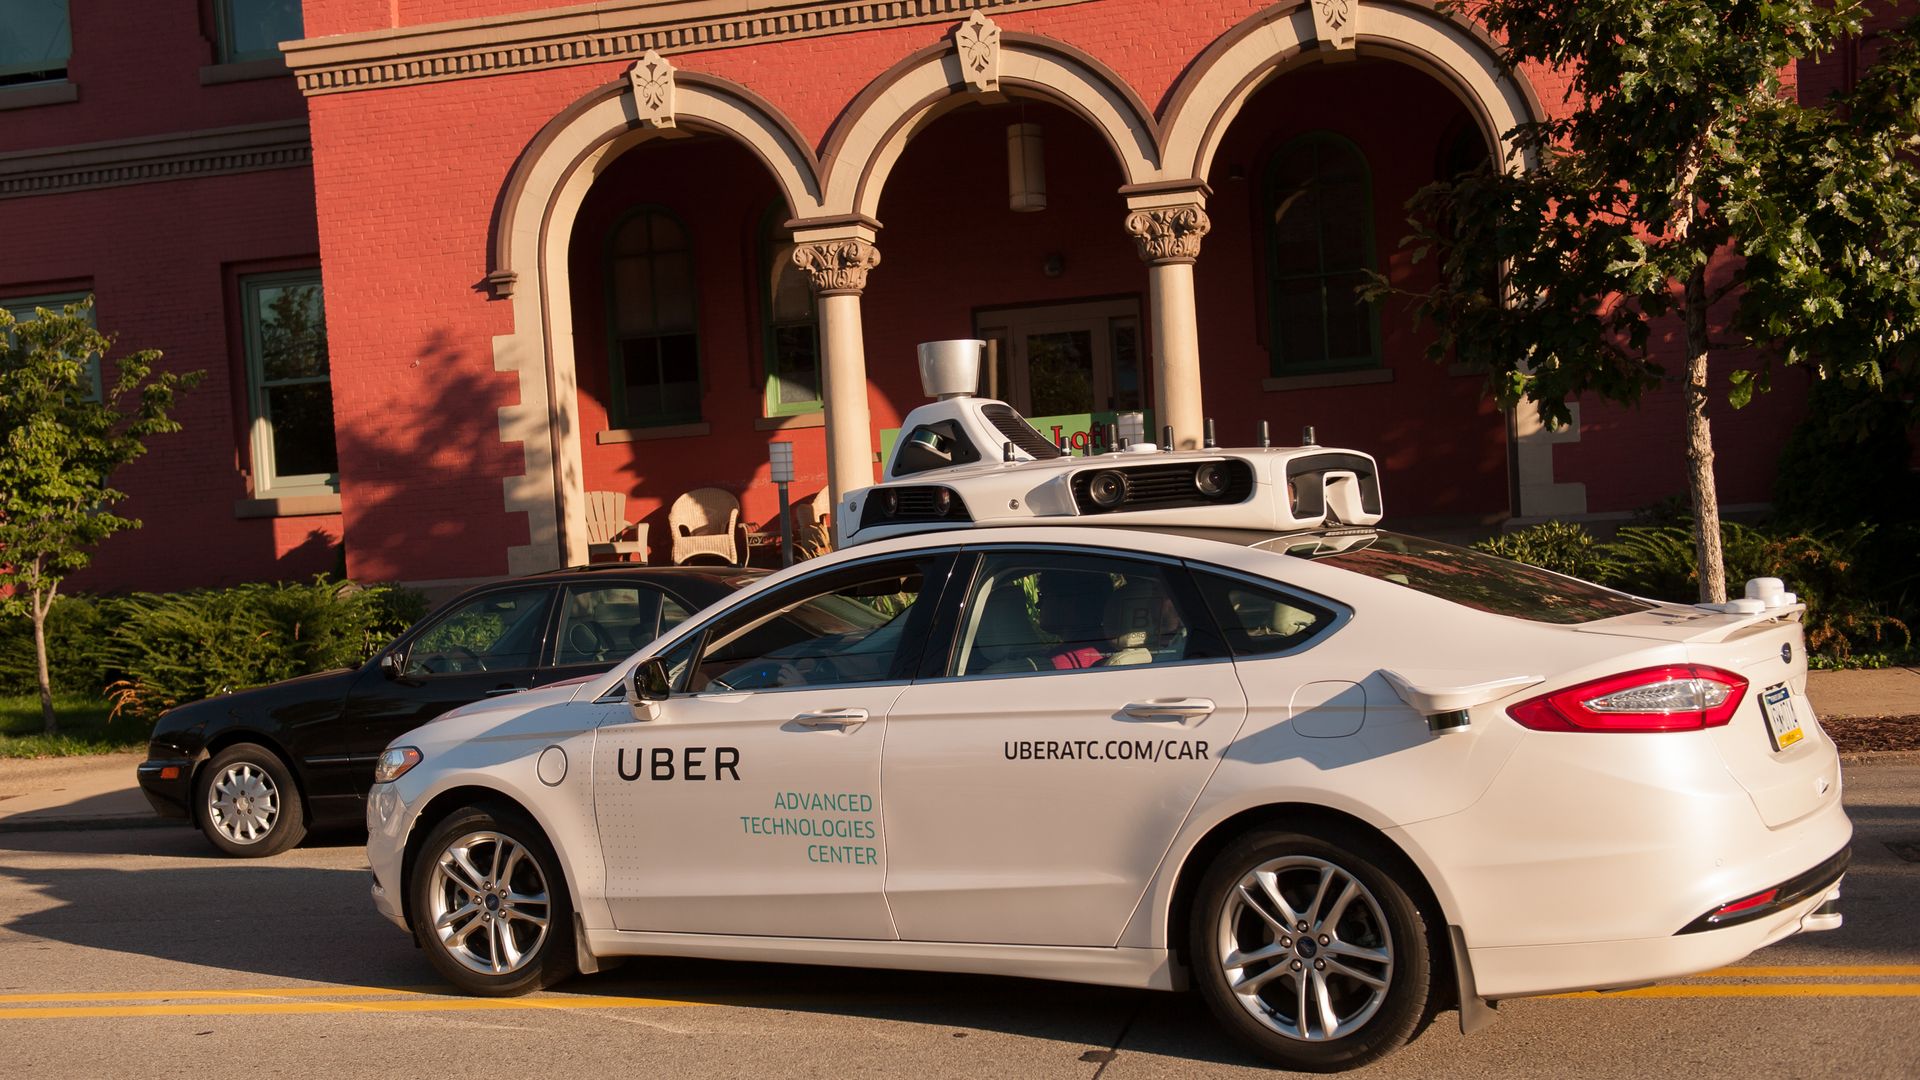 Self-driving Uber on the street in Pittsburgh